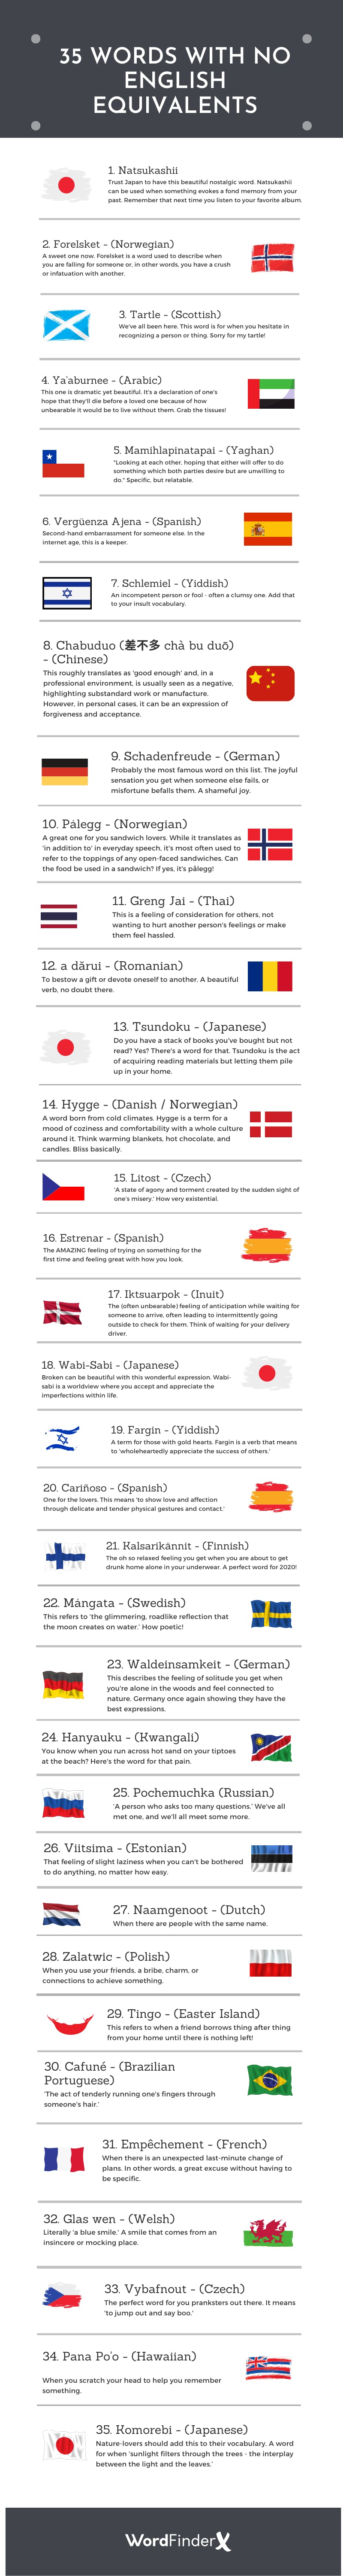 words that can't be translated into English - infographic